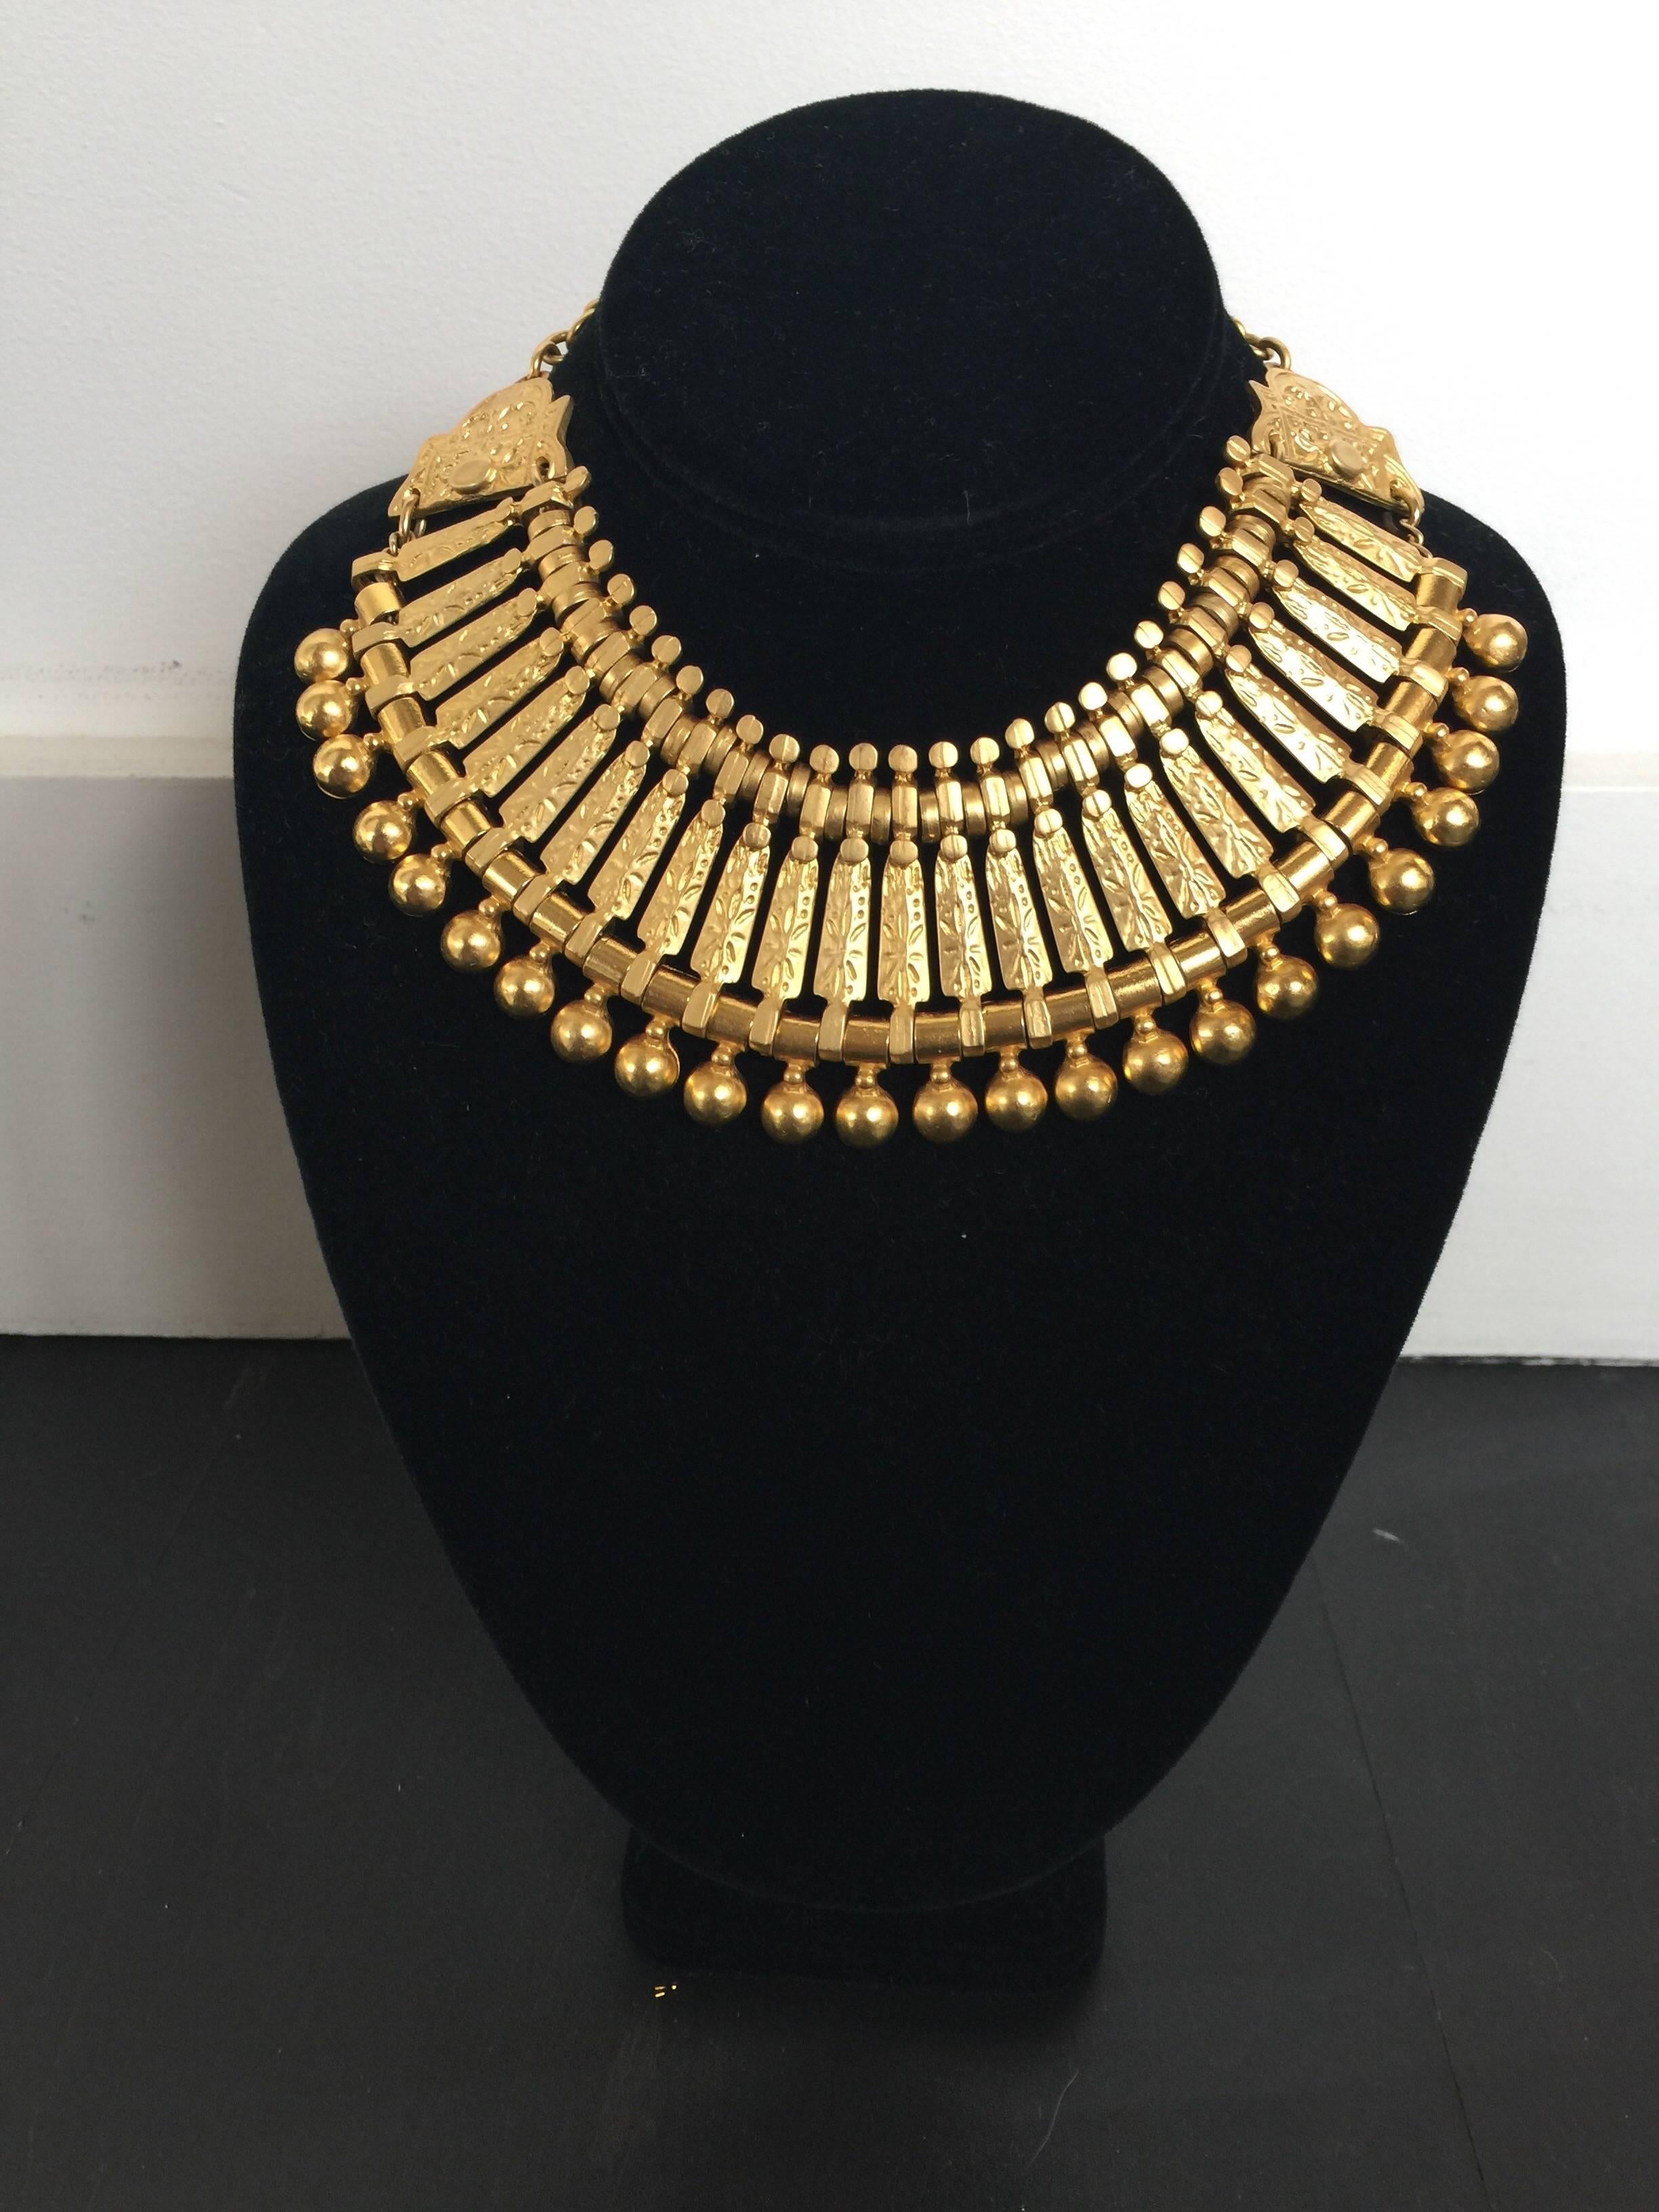 This gold tone metal necklace has an Egyptian feel to it.  It has a moveable link bib and chain necklace with adjustable lengths. 